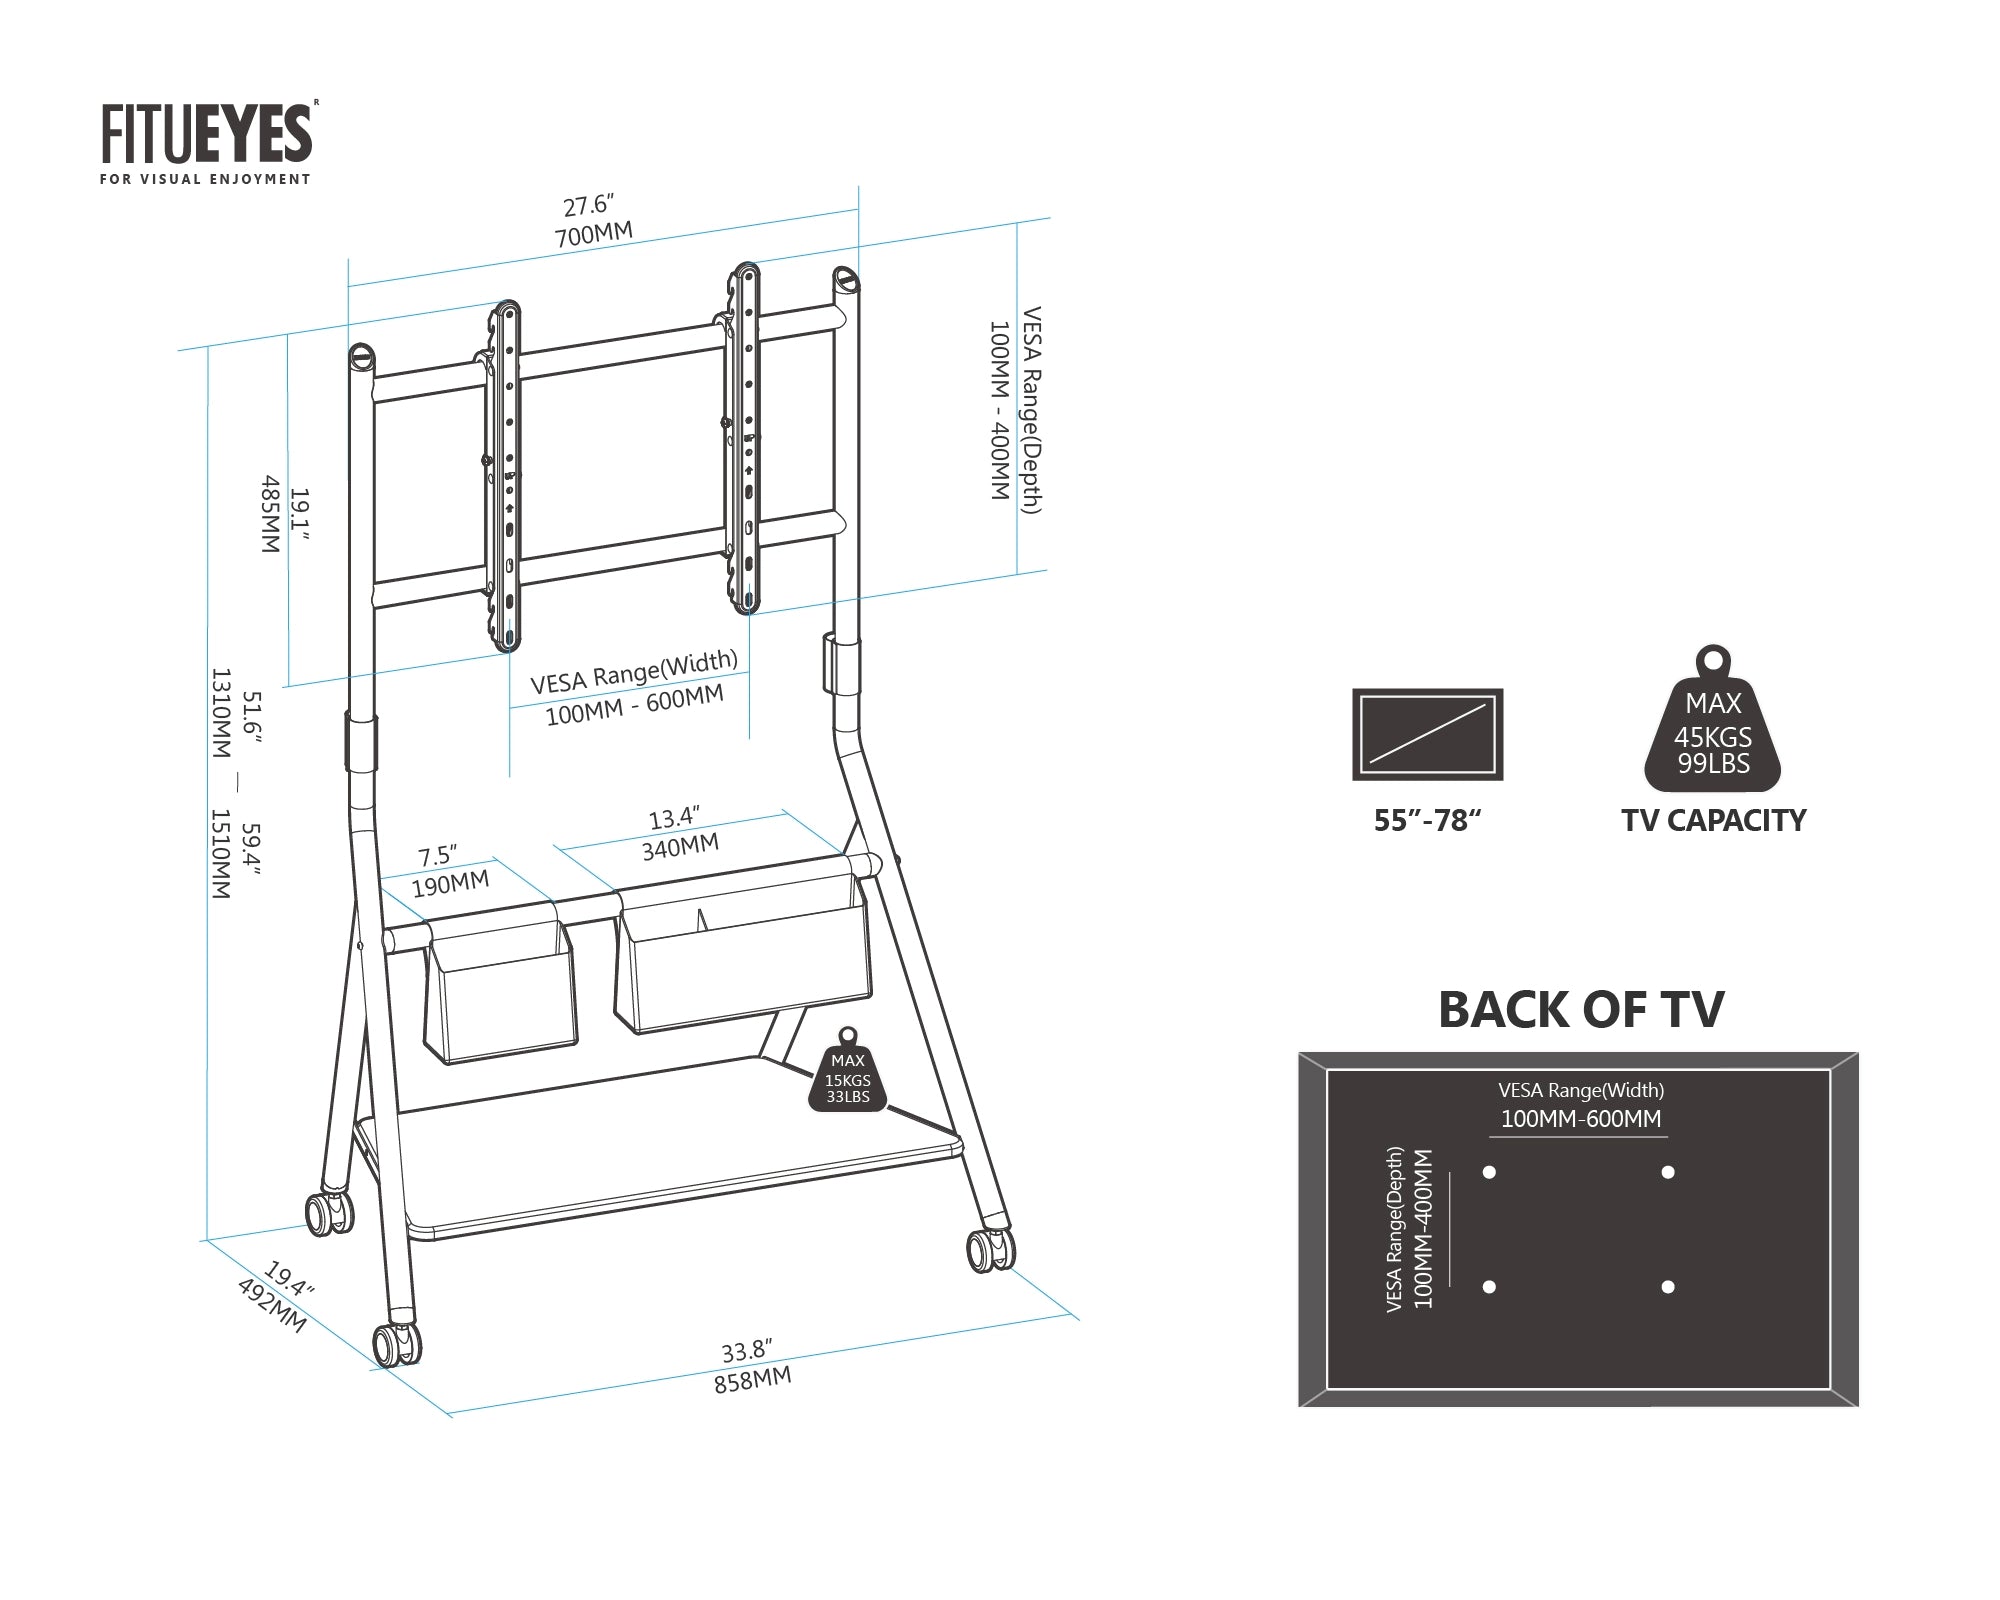 Collector TC78 Rolling TV Stand